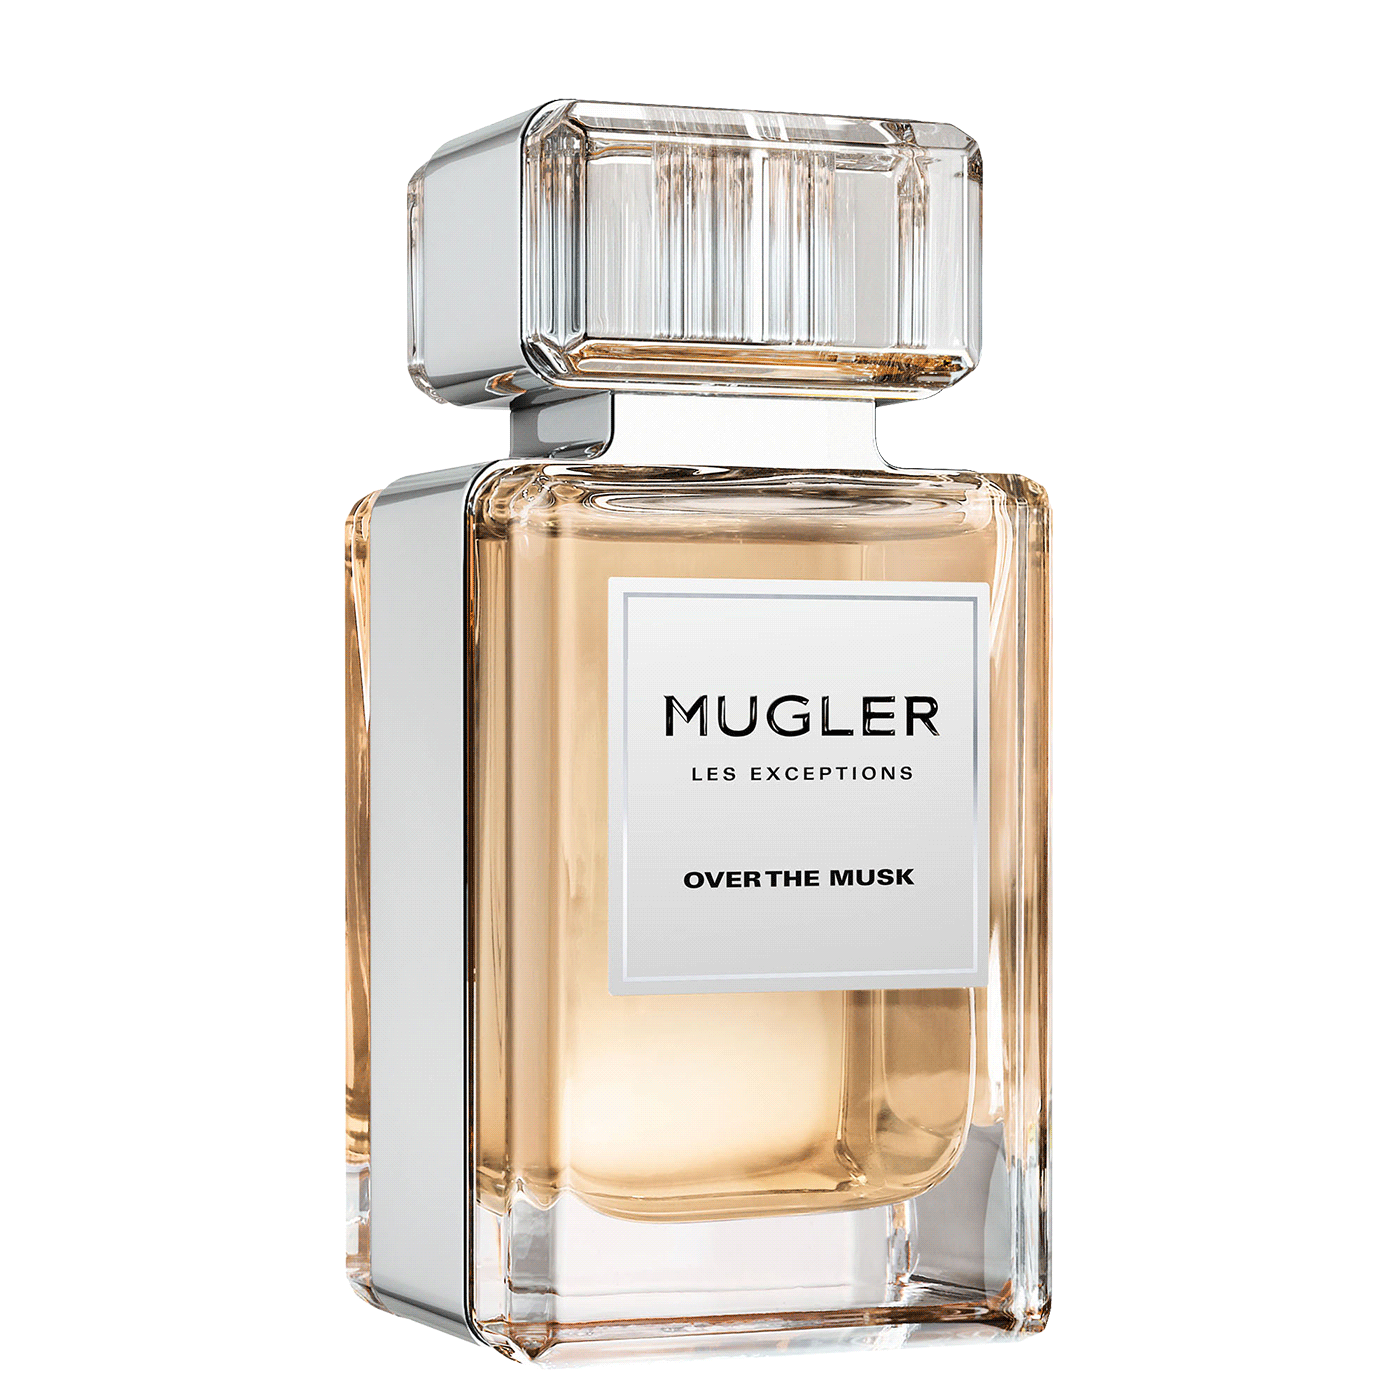 MUGLER Les Exceptions – Over the Musk